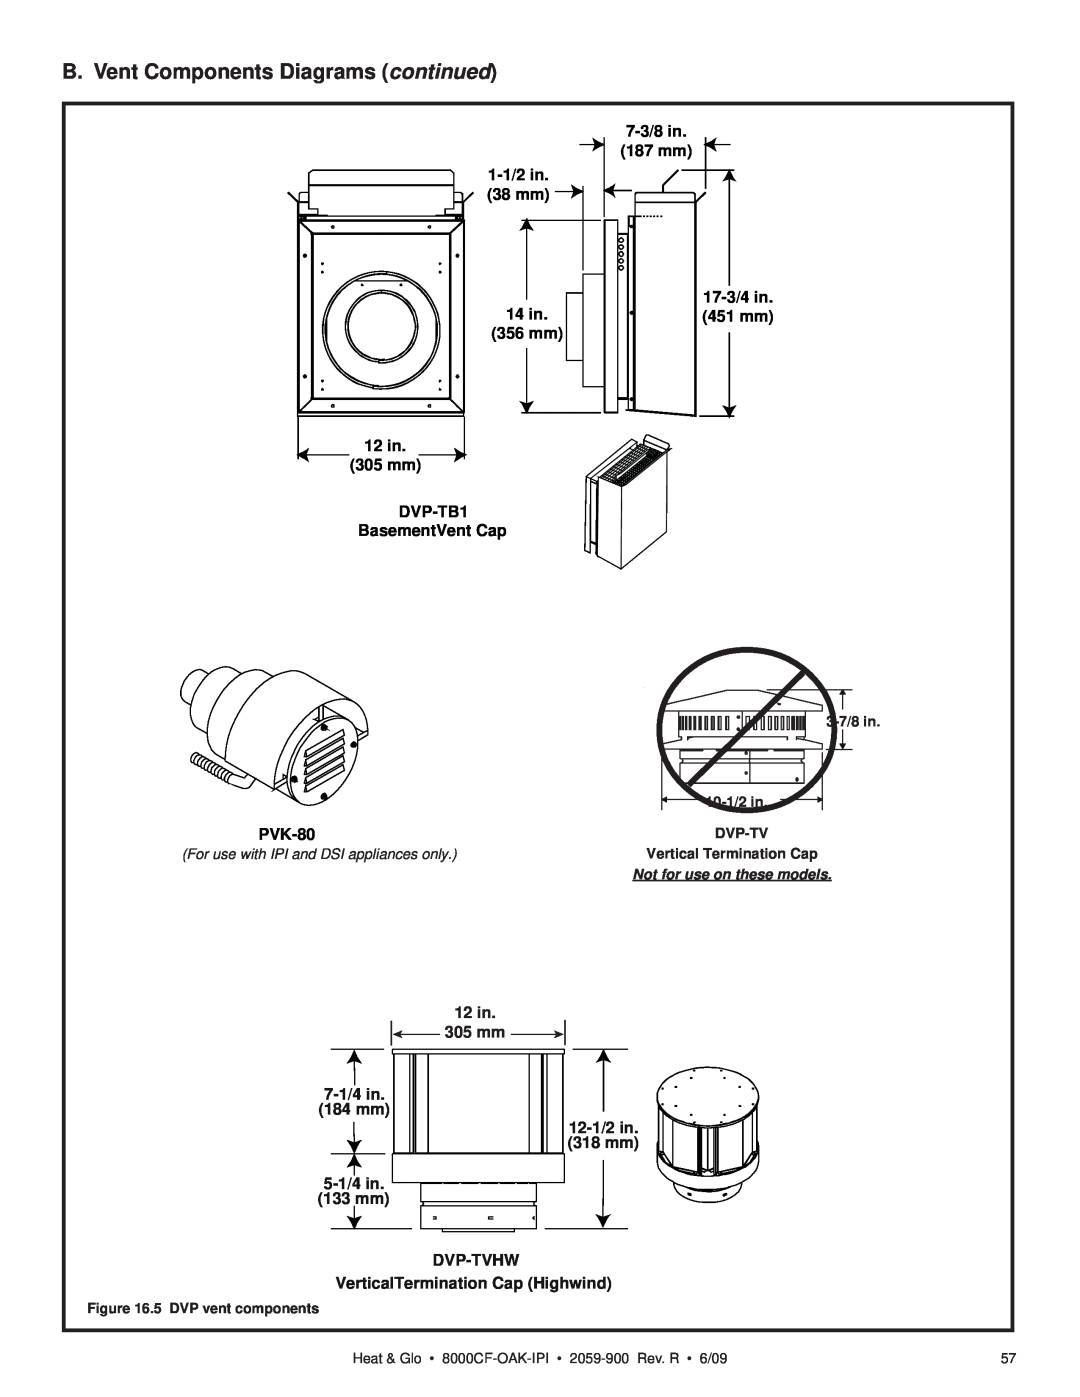 Heat & Glo LifeStyle 8000CF-OAK-IPI B. Vent Components Diagrams continued, 1-1/2in 38 mm, 7-3/8in 187 mm, BasementVent Cap 